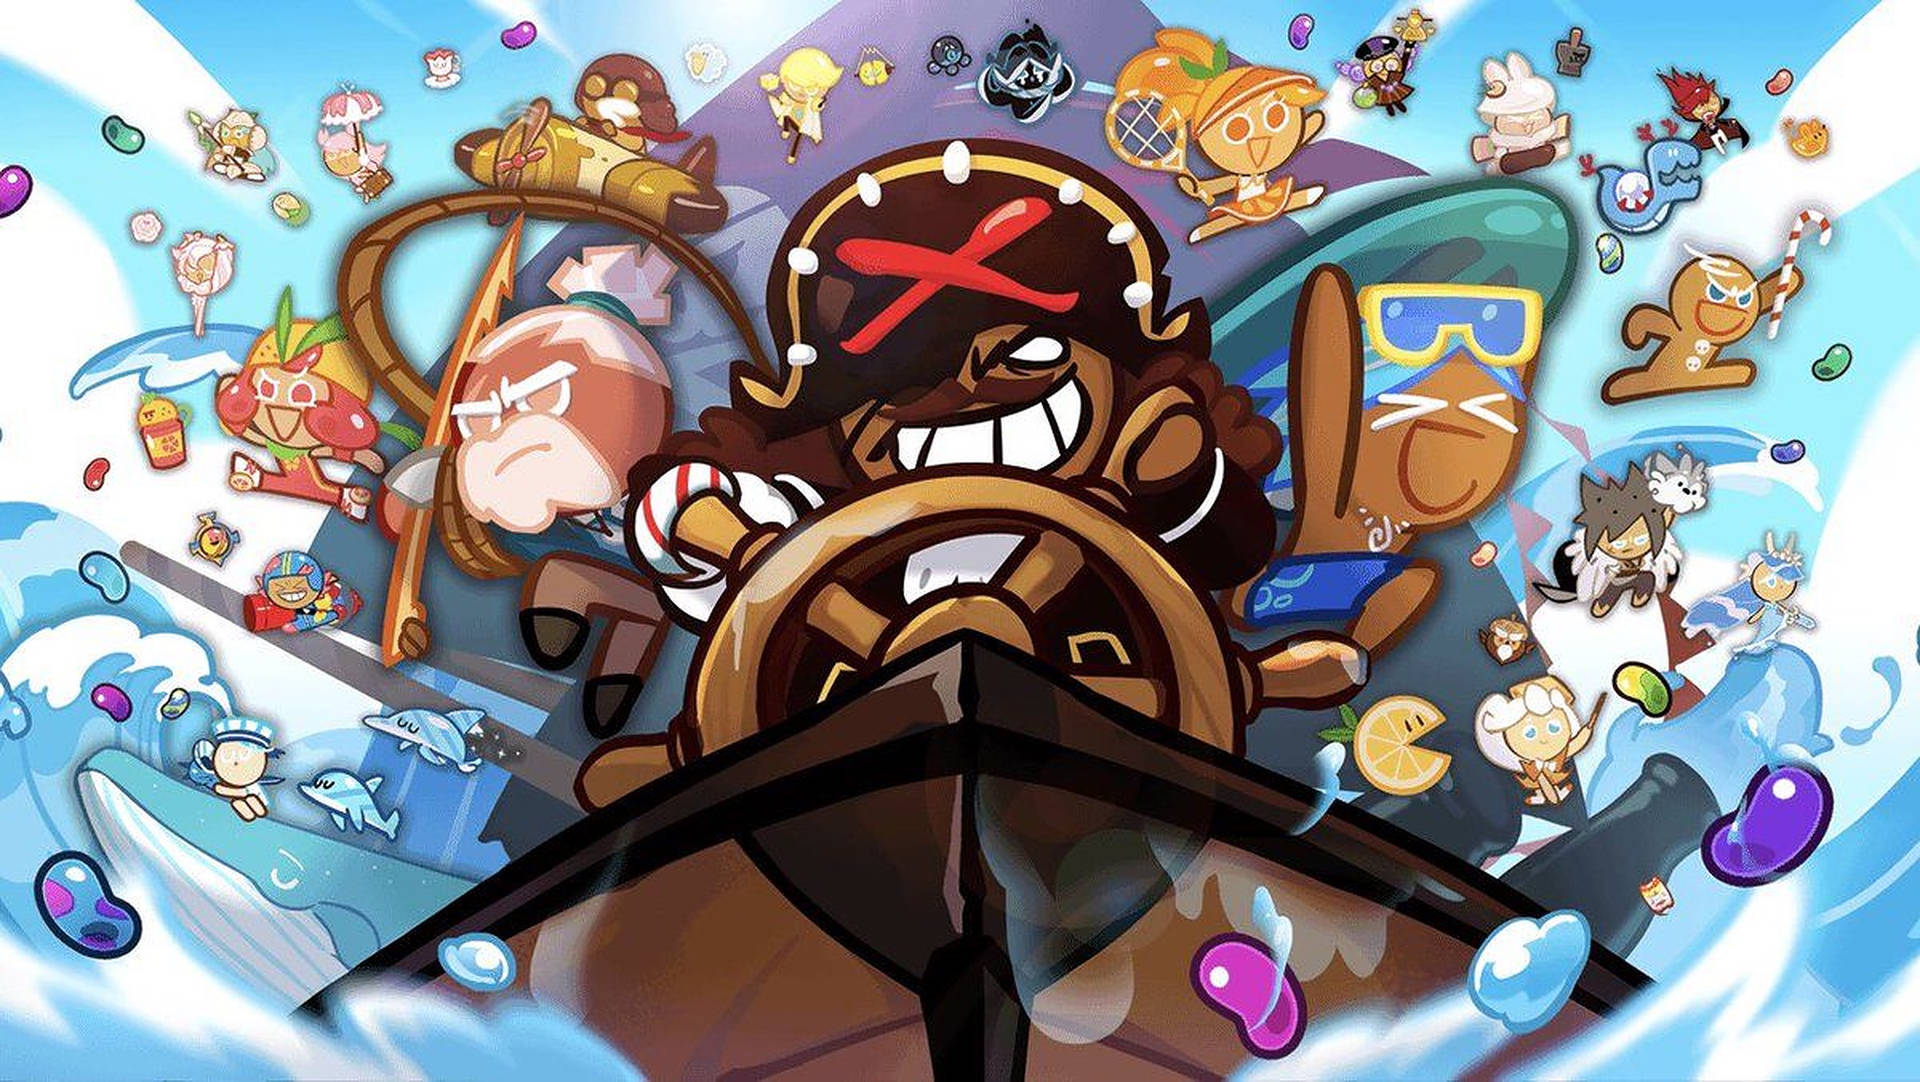 Exciting Adventures in the Cookie Run World with Pirate Ship Wallpaper